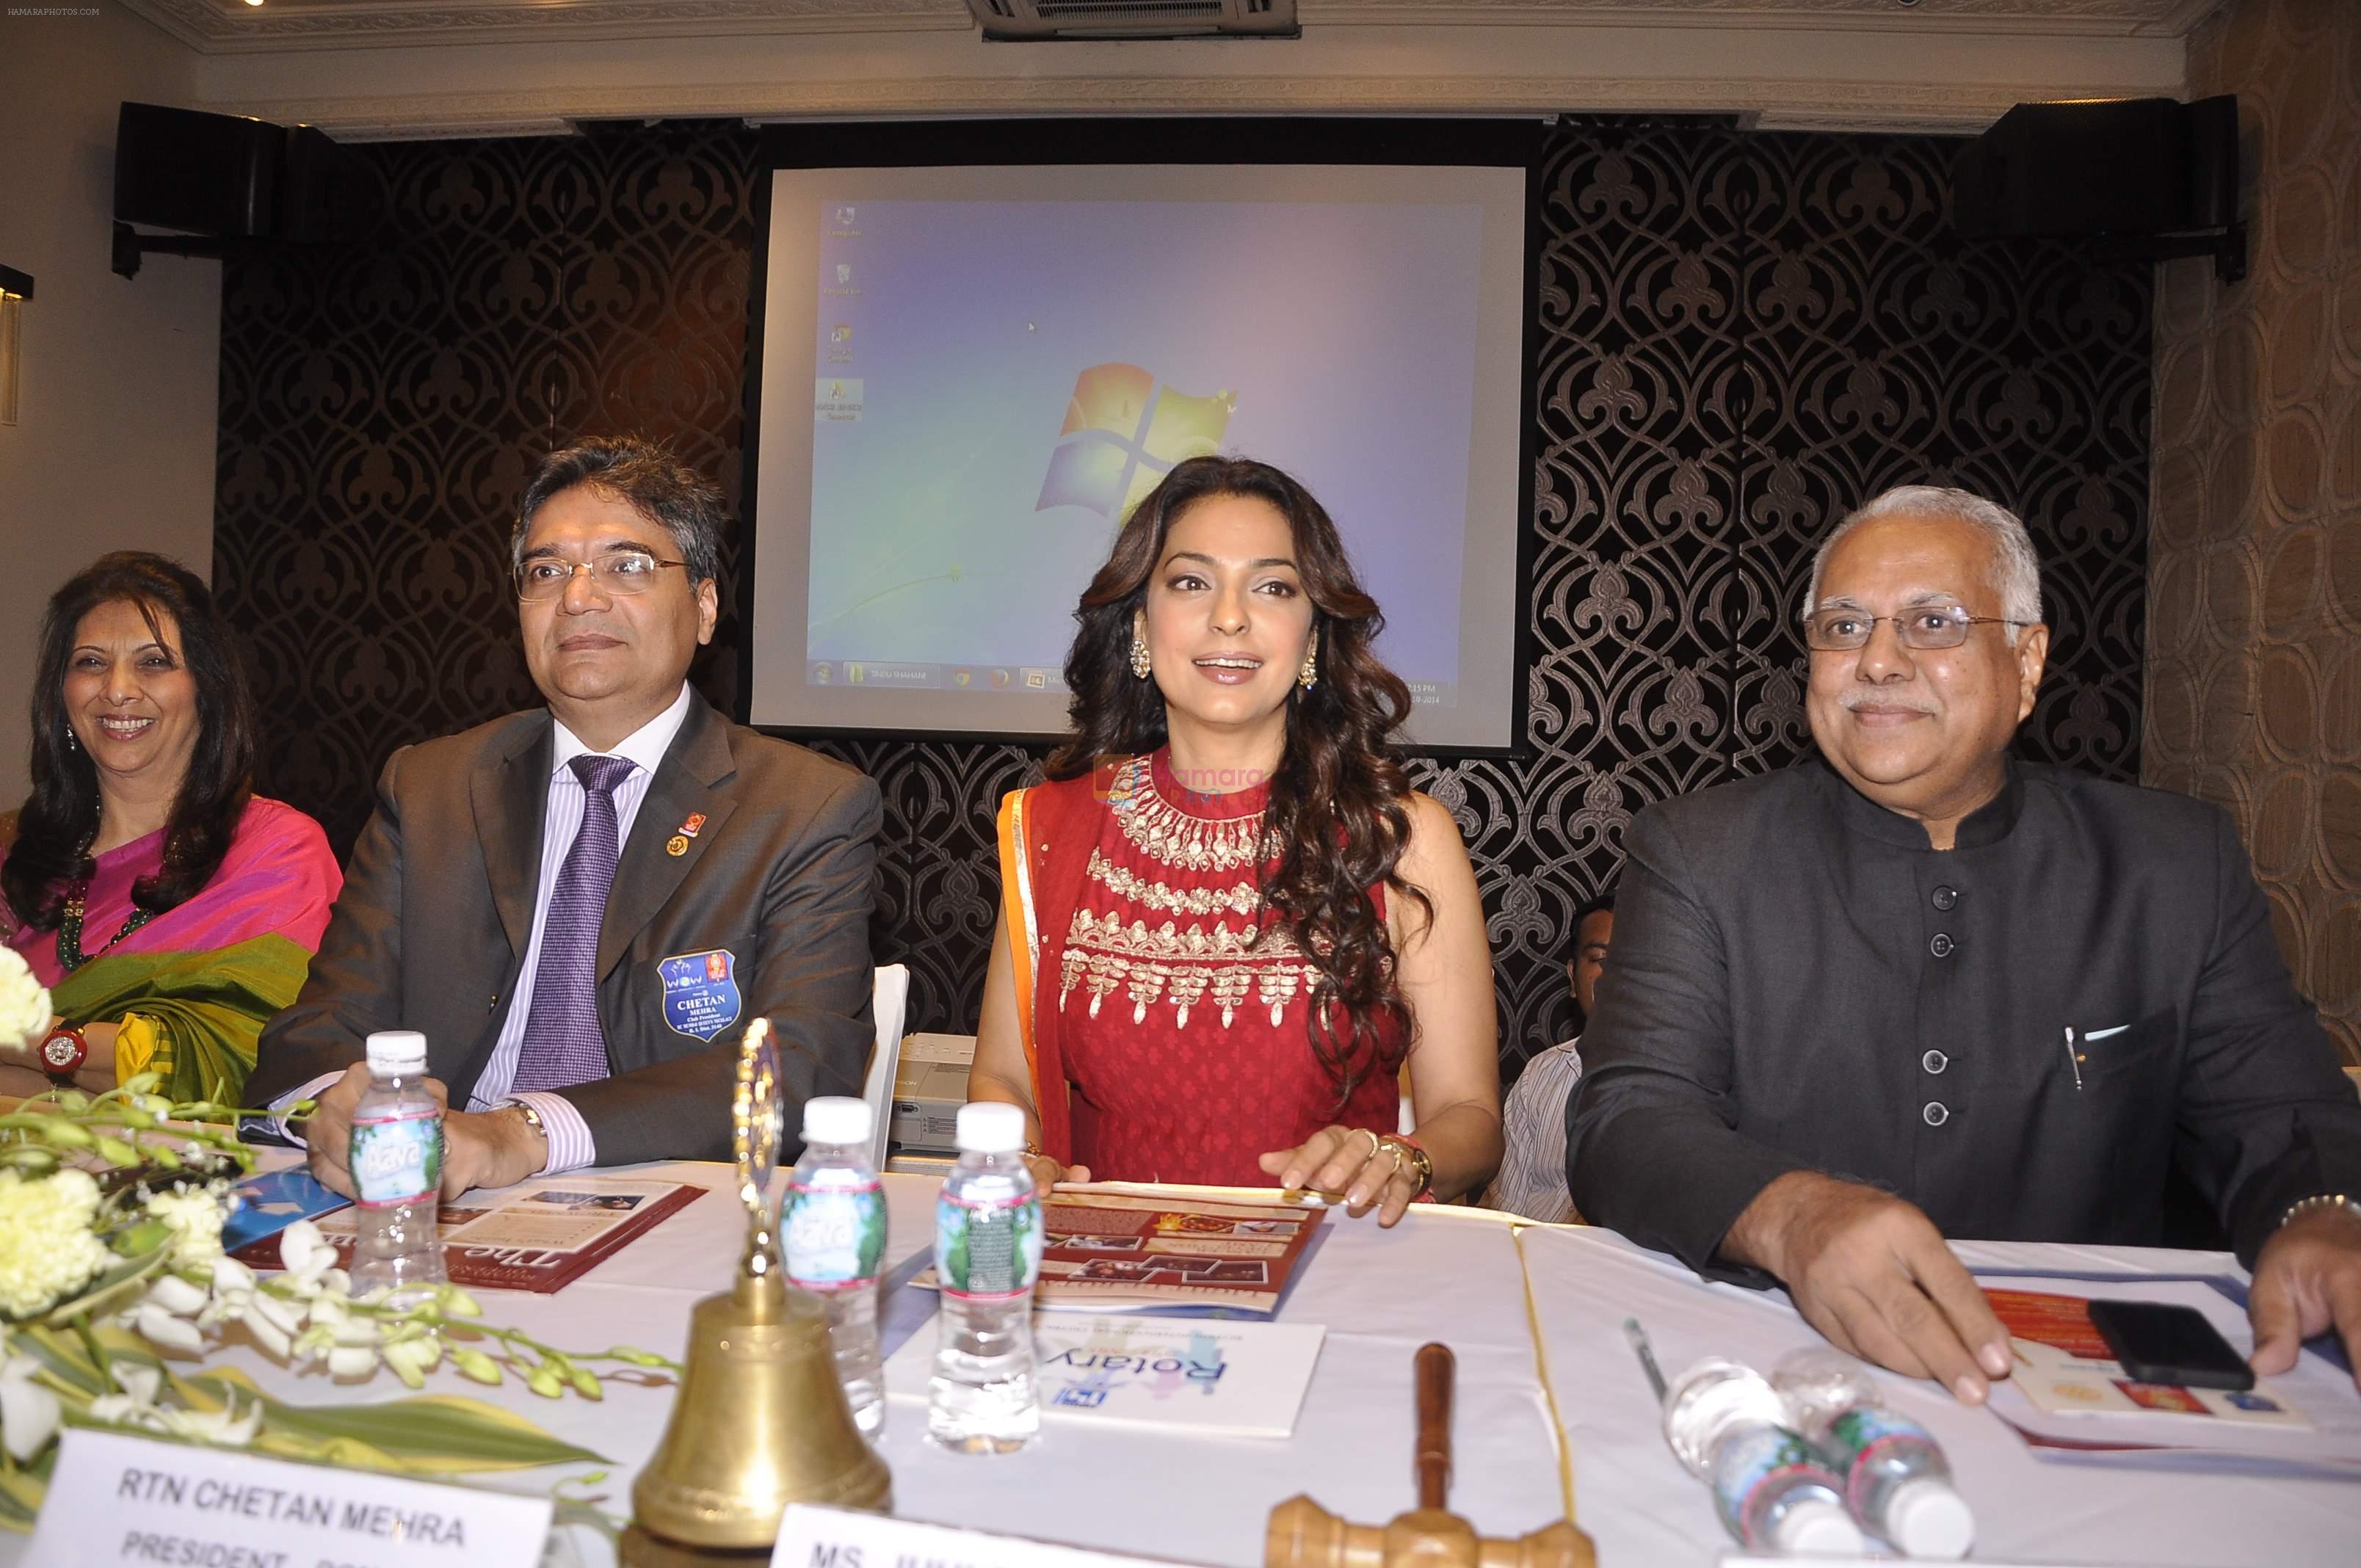 Juhi Chawla receives the vocational excellence award from the Rotary international on 10th Oct 2014